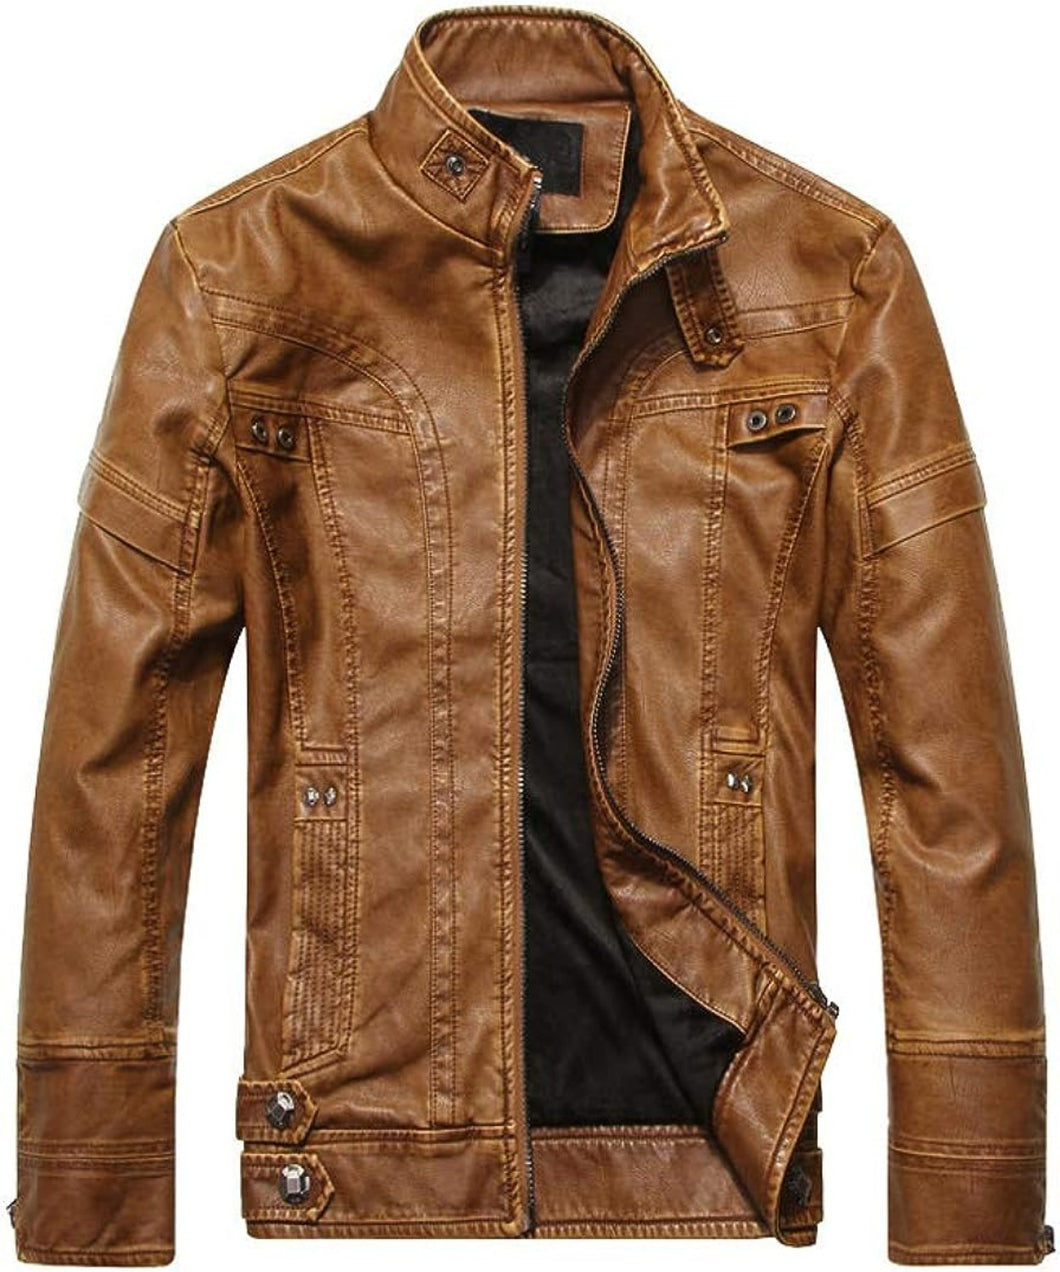 Men's Vintage Stand Collar Motorcycle Leather Jacket